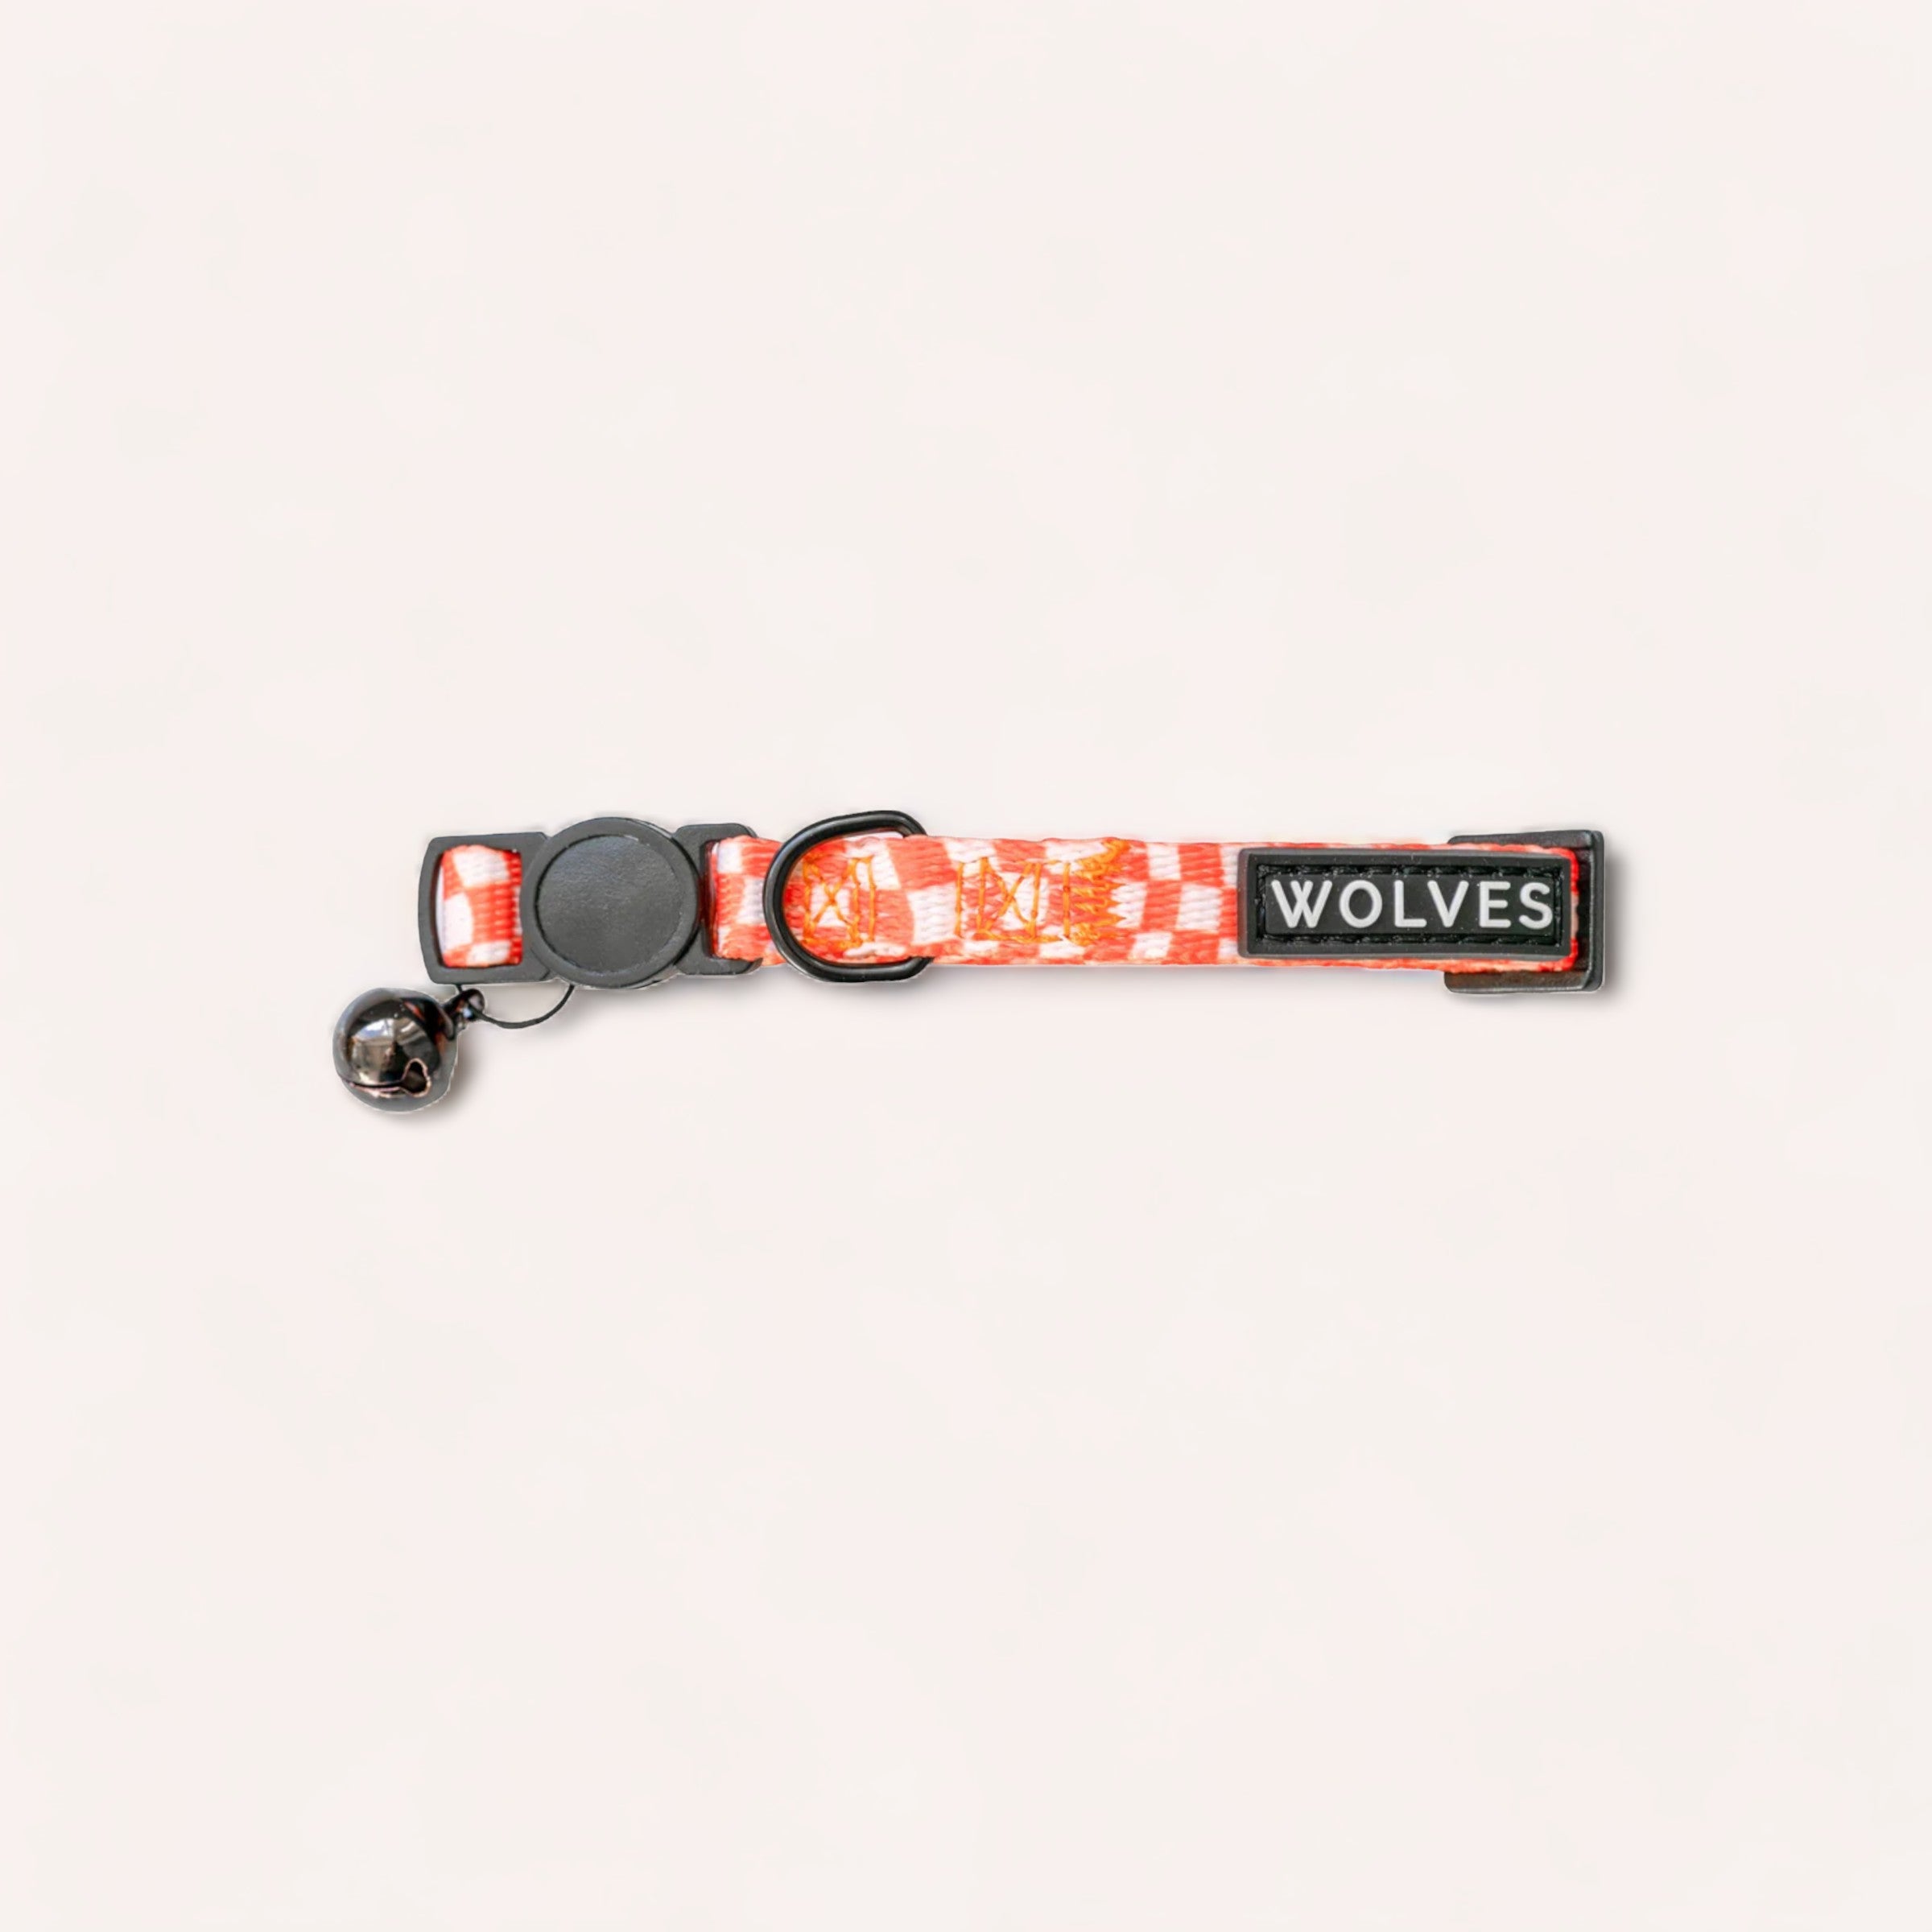 A red and gray canine collar with a camouflage pattern, featuring a breakaway buckle, a metal d-ring, and a patch that reads "wolves" called the Benji Cat Collar by Wolves of Wellington.